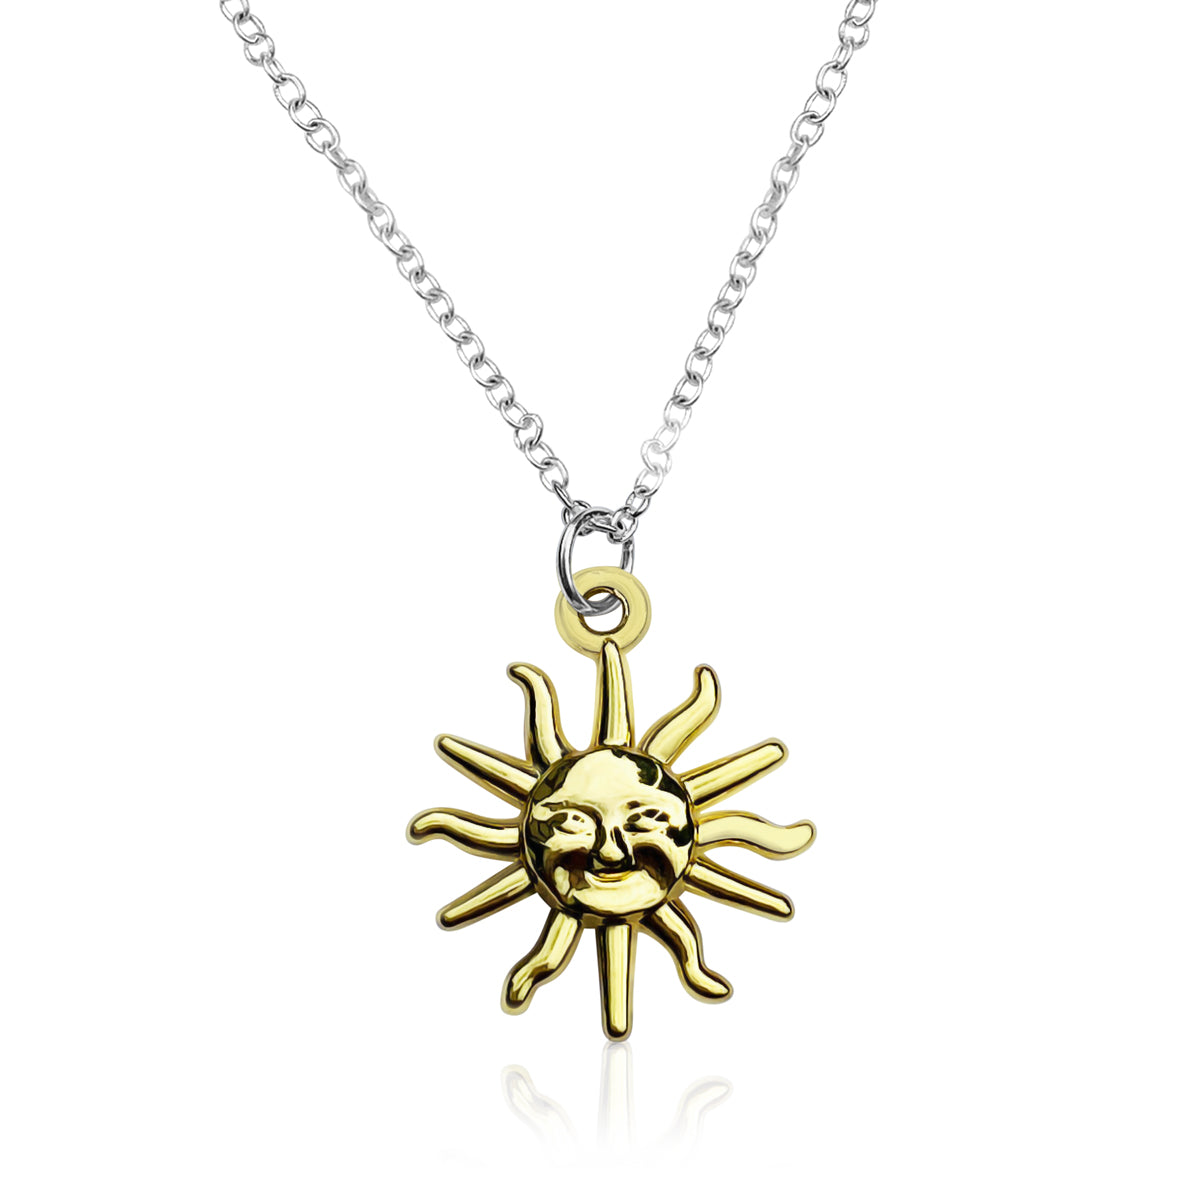 Sunshine Necklace to allow yourself to shine